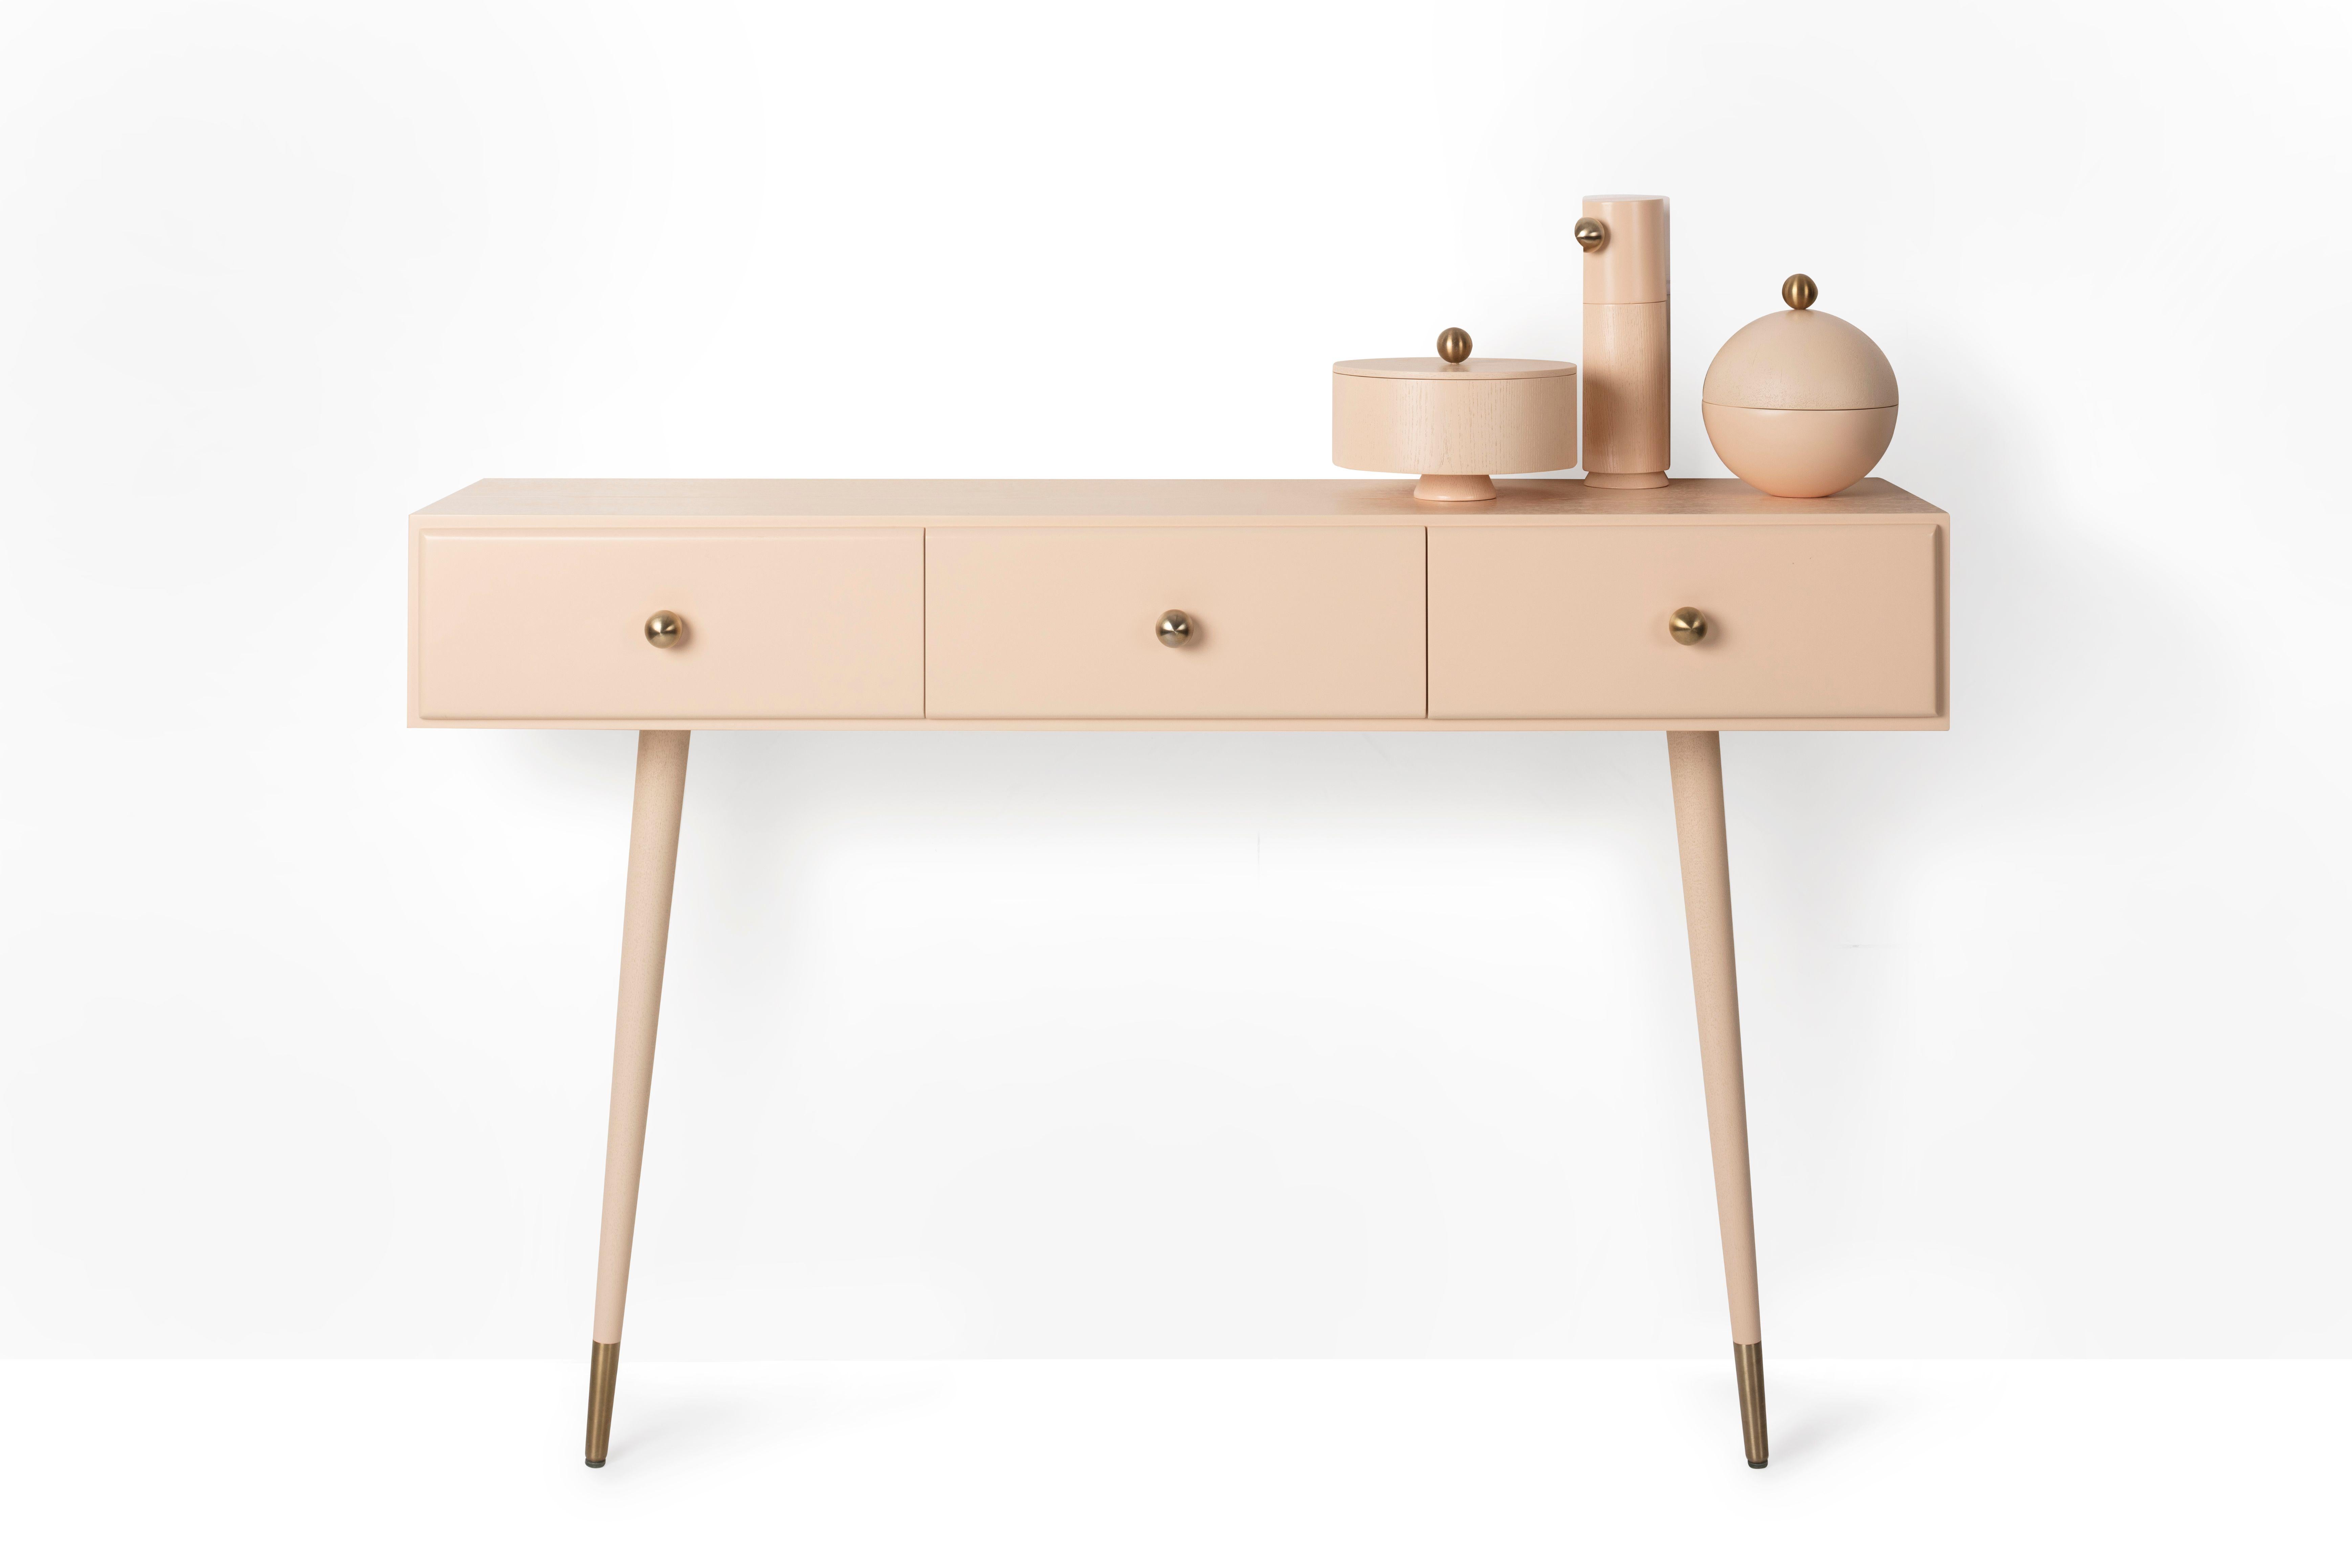 Colorful console by Thomas Dariel, Maison Dada.
Measures: W 160 x D 30 x H 110 cm or W 130 x D 30 x H110 cm.
Top in painted ash veneer • fronts in matte paint finish.
Structure in MDF • metal legs with painted ash veneer • metal tip.
Fixed